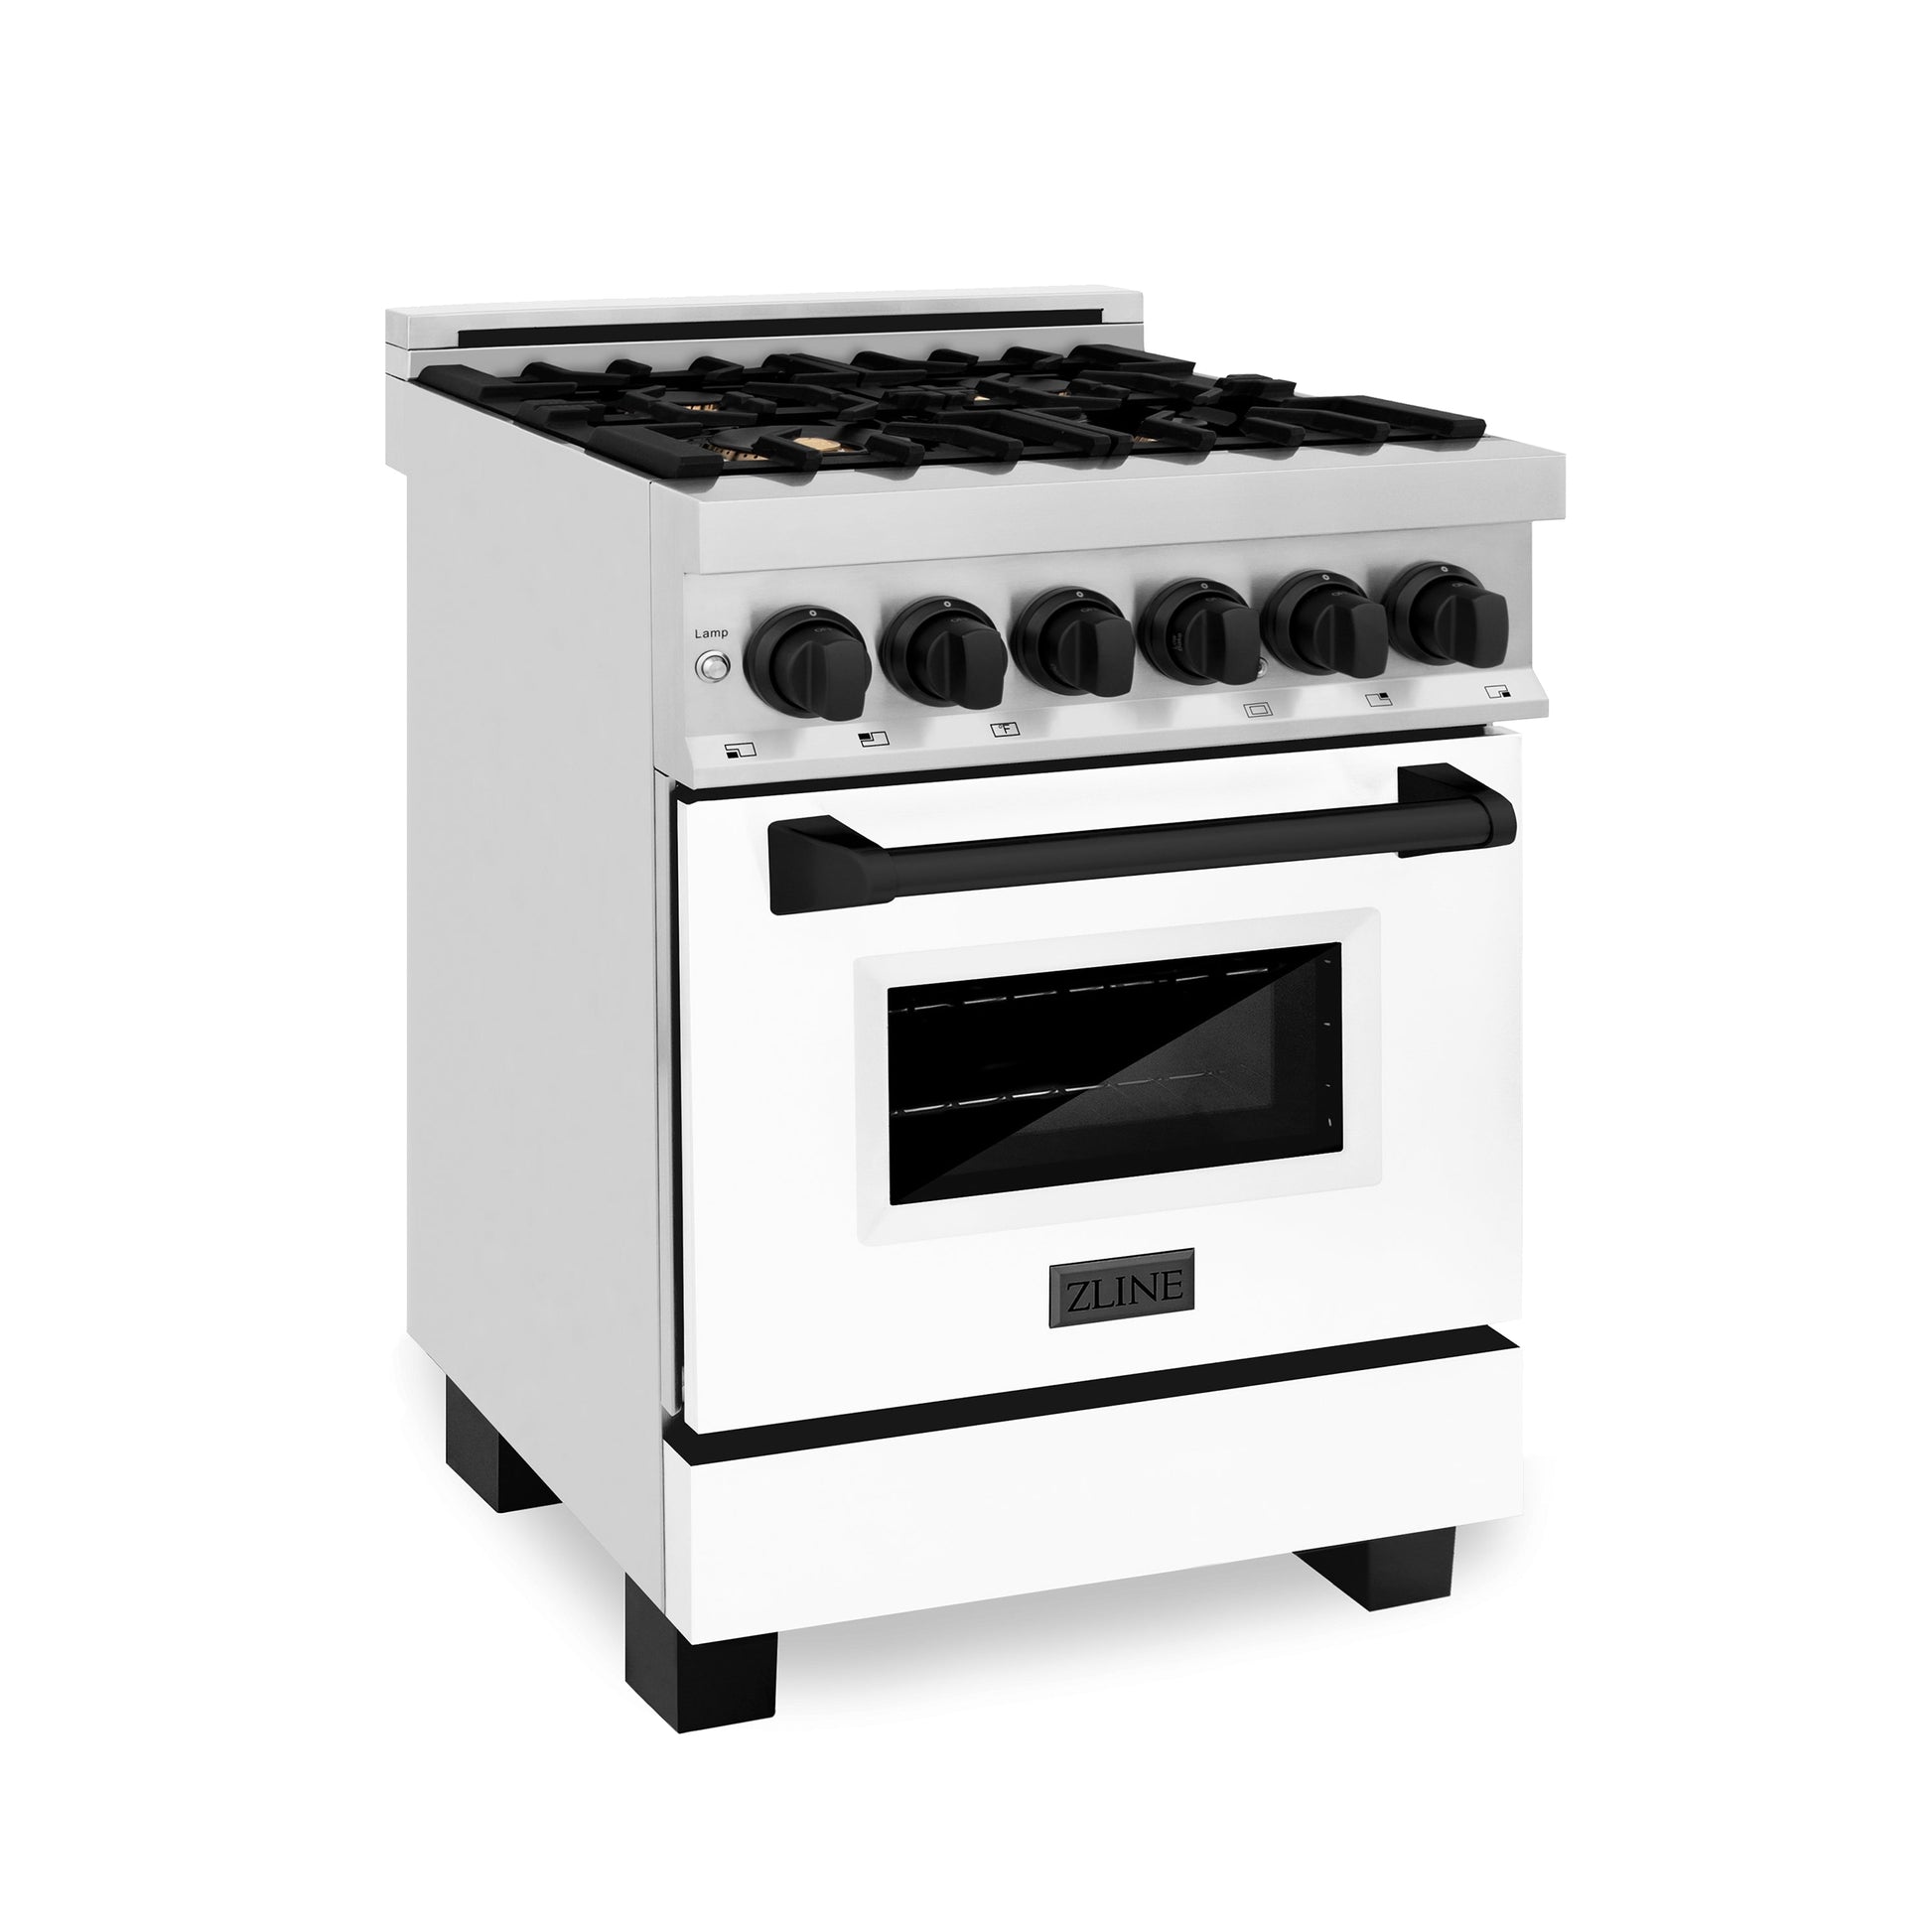 ZLINE Autograph Edition 24" Dual Fuel Range with Gas Stove and Electric Oven - Stainless Steel with Matte White Door and Accents